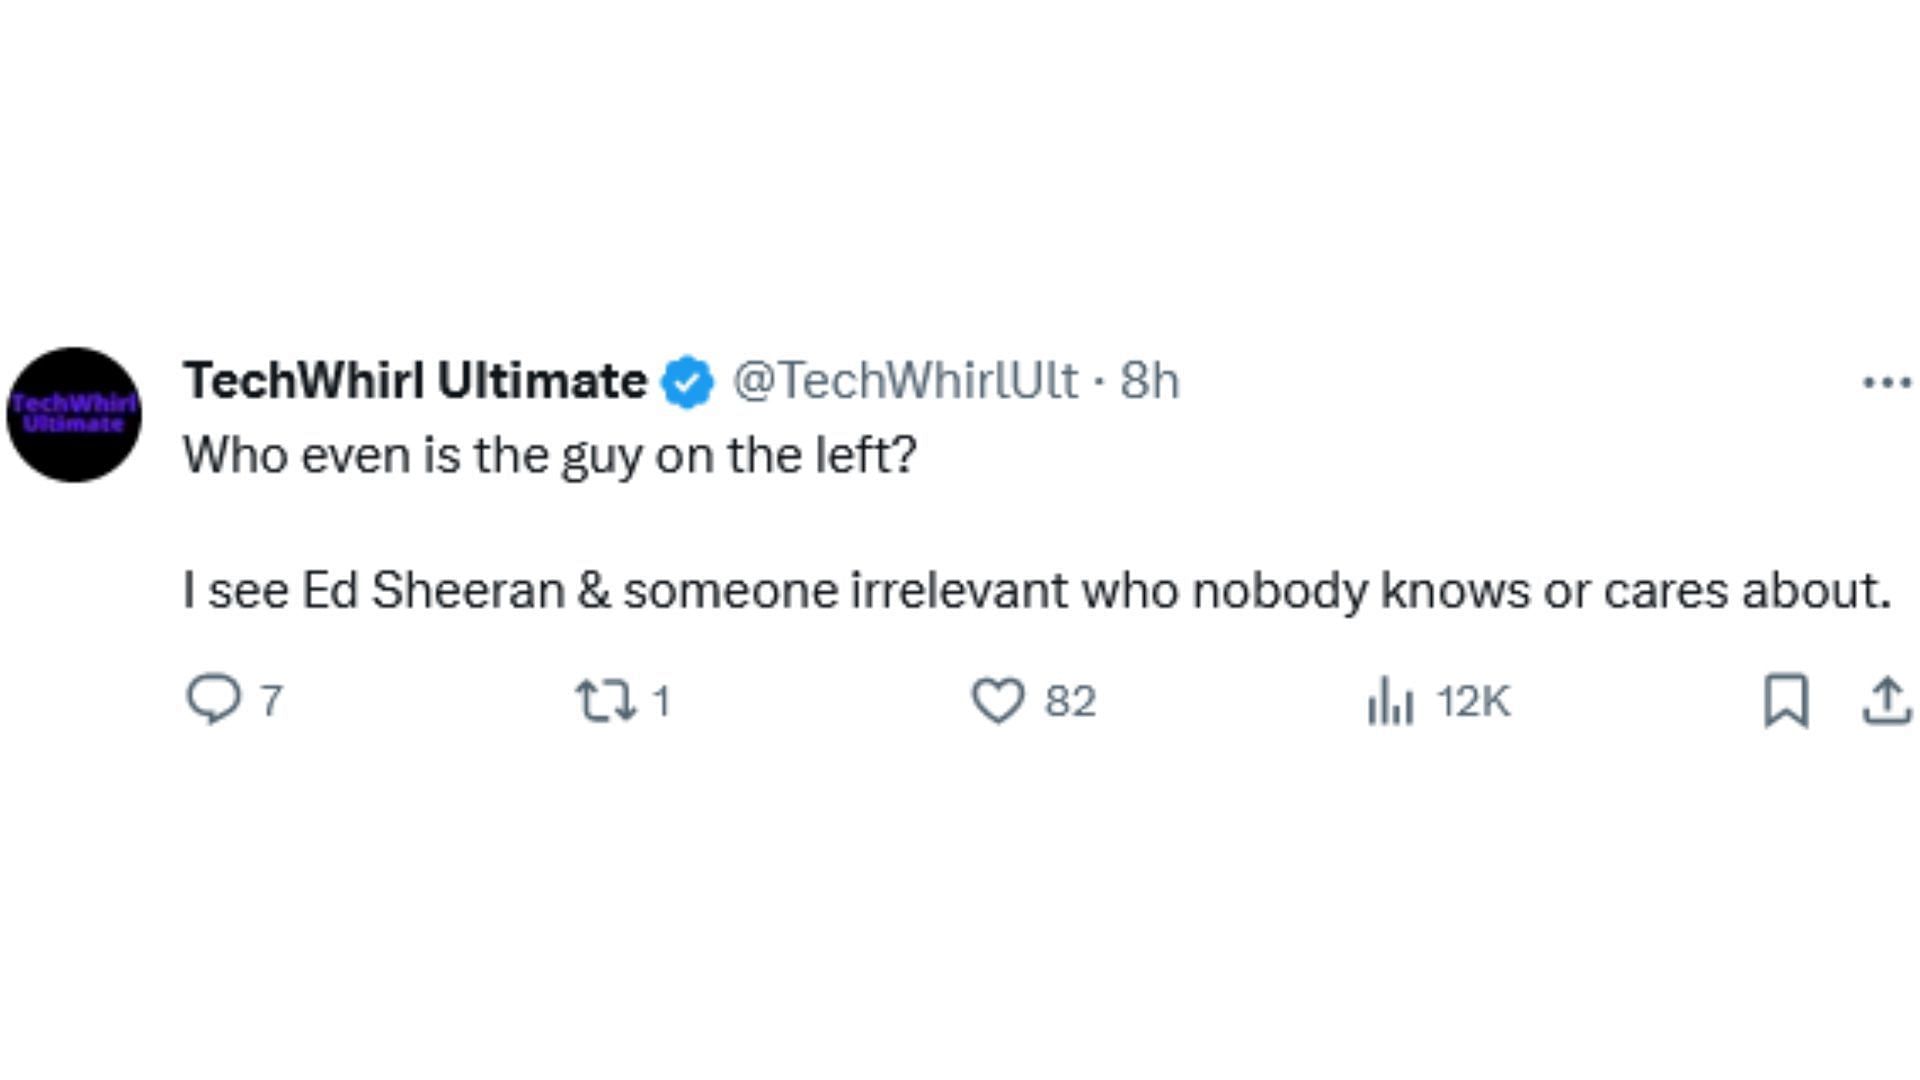 Netizens reacted hilariously as Stewart looked down upon Sheeran&rsquo;s music (Image via X/@TechWhirlUlt)